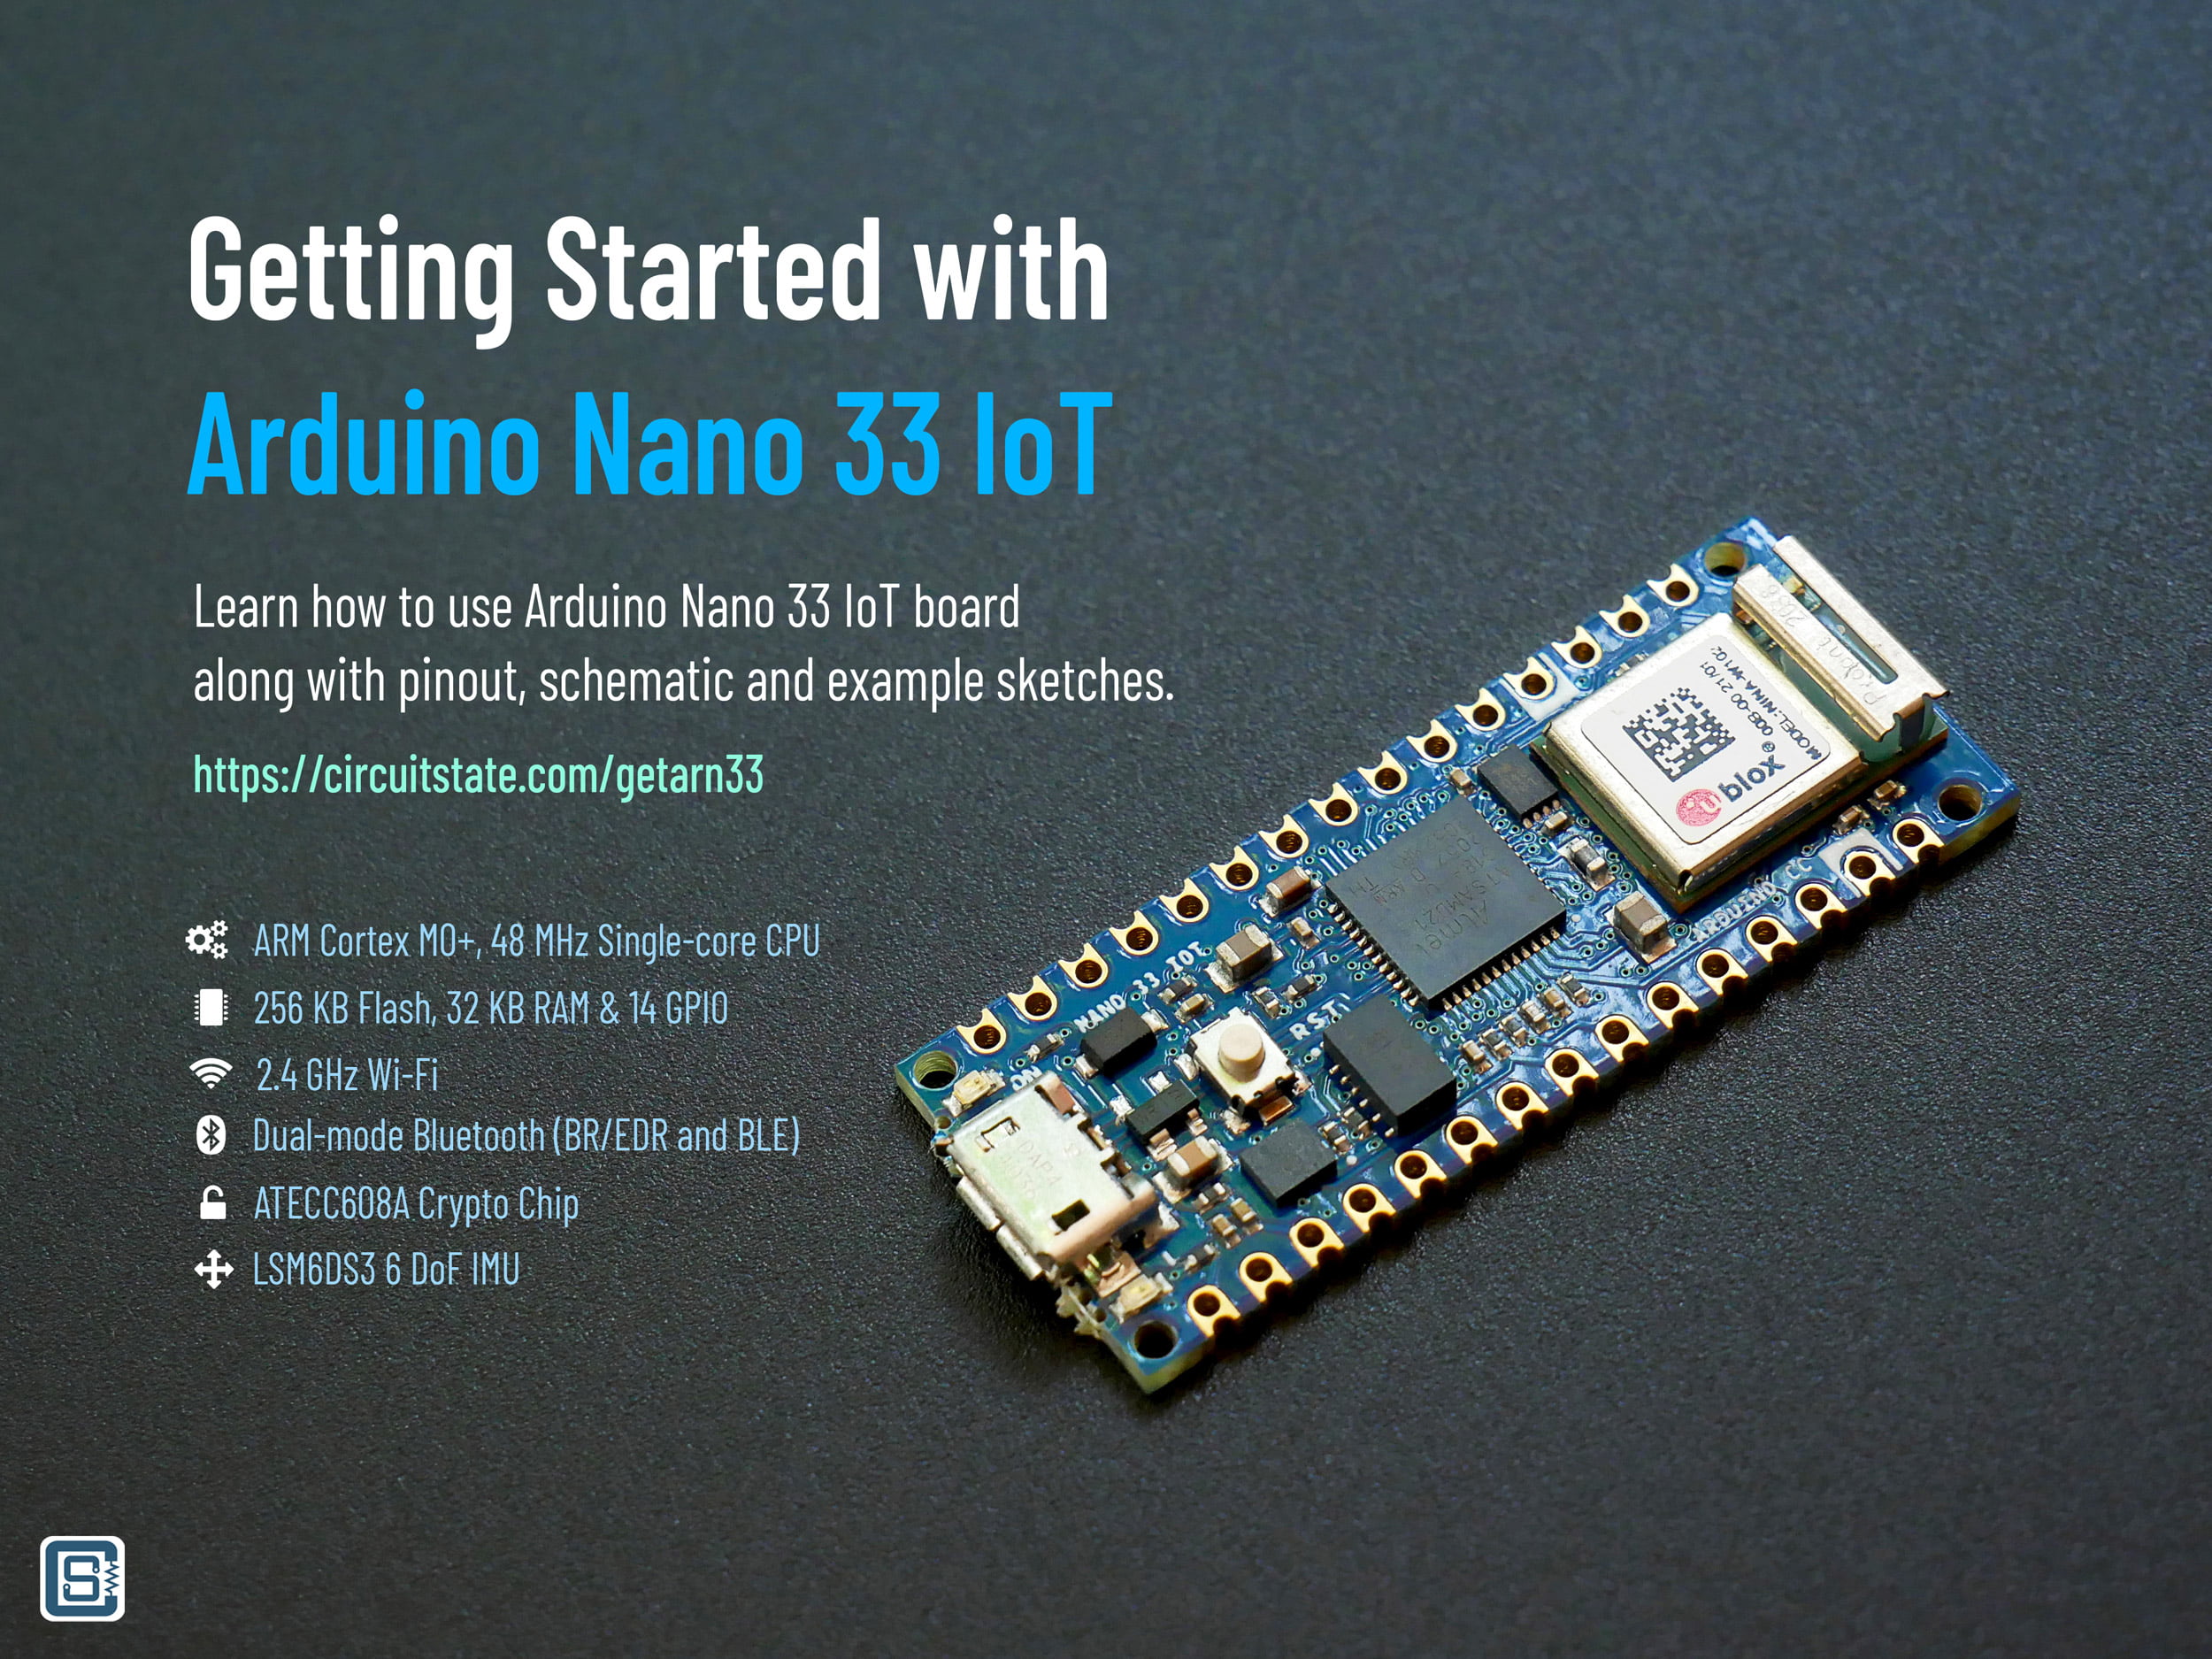 Getting Started with Arduino Nano 33 IoT Microcontroller Development Board  - Pinout, Schematic & Example Programs - CIRCUITSTATE Electronics